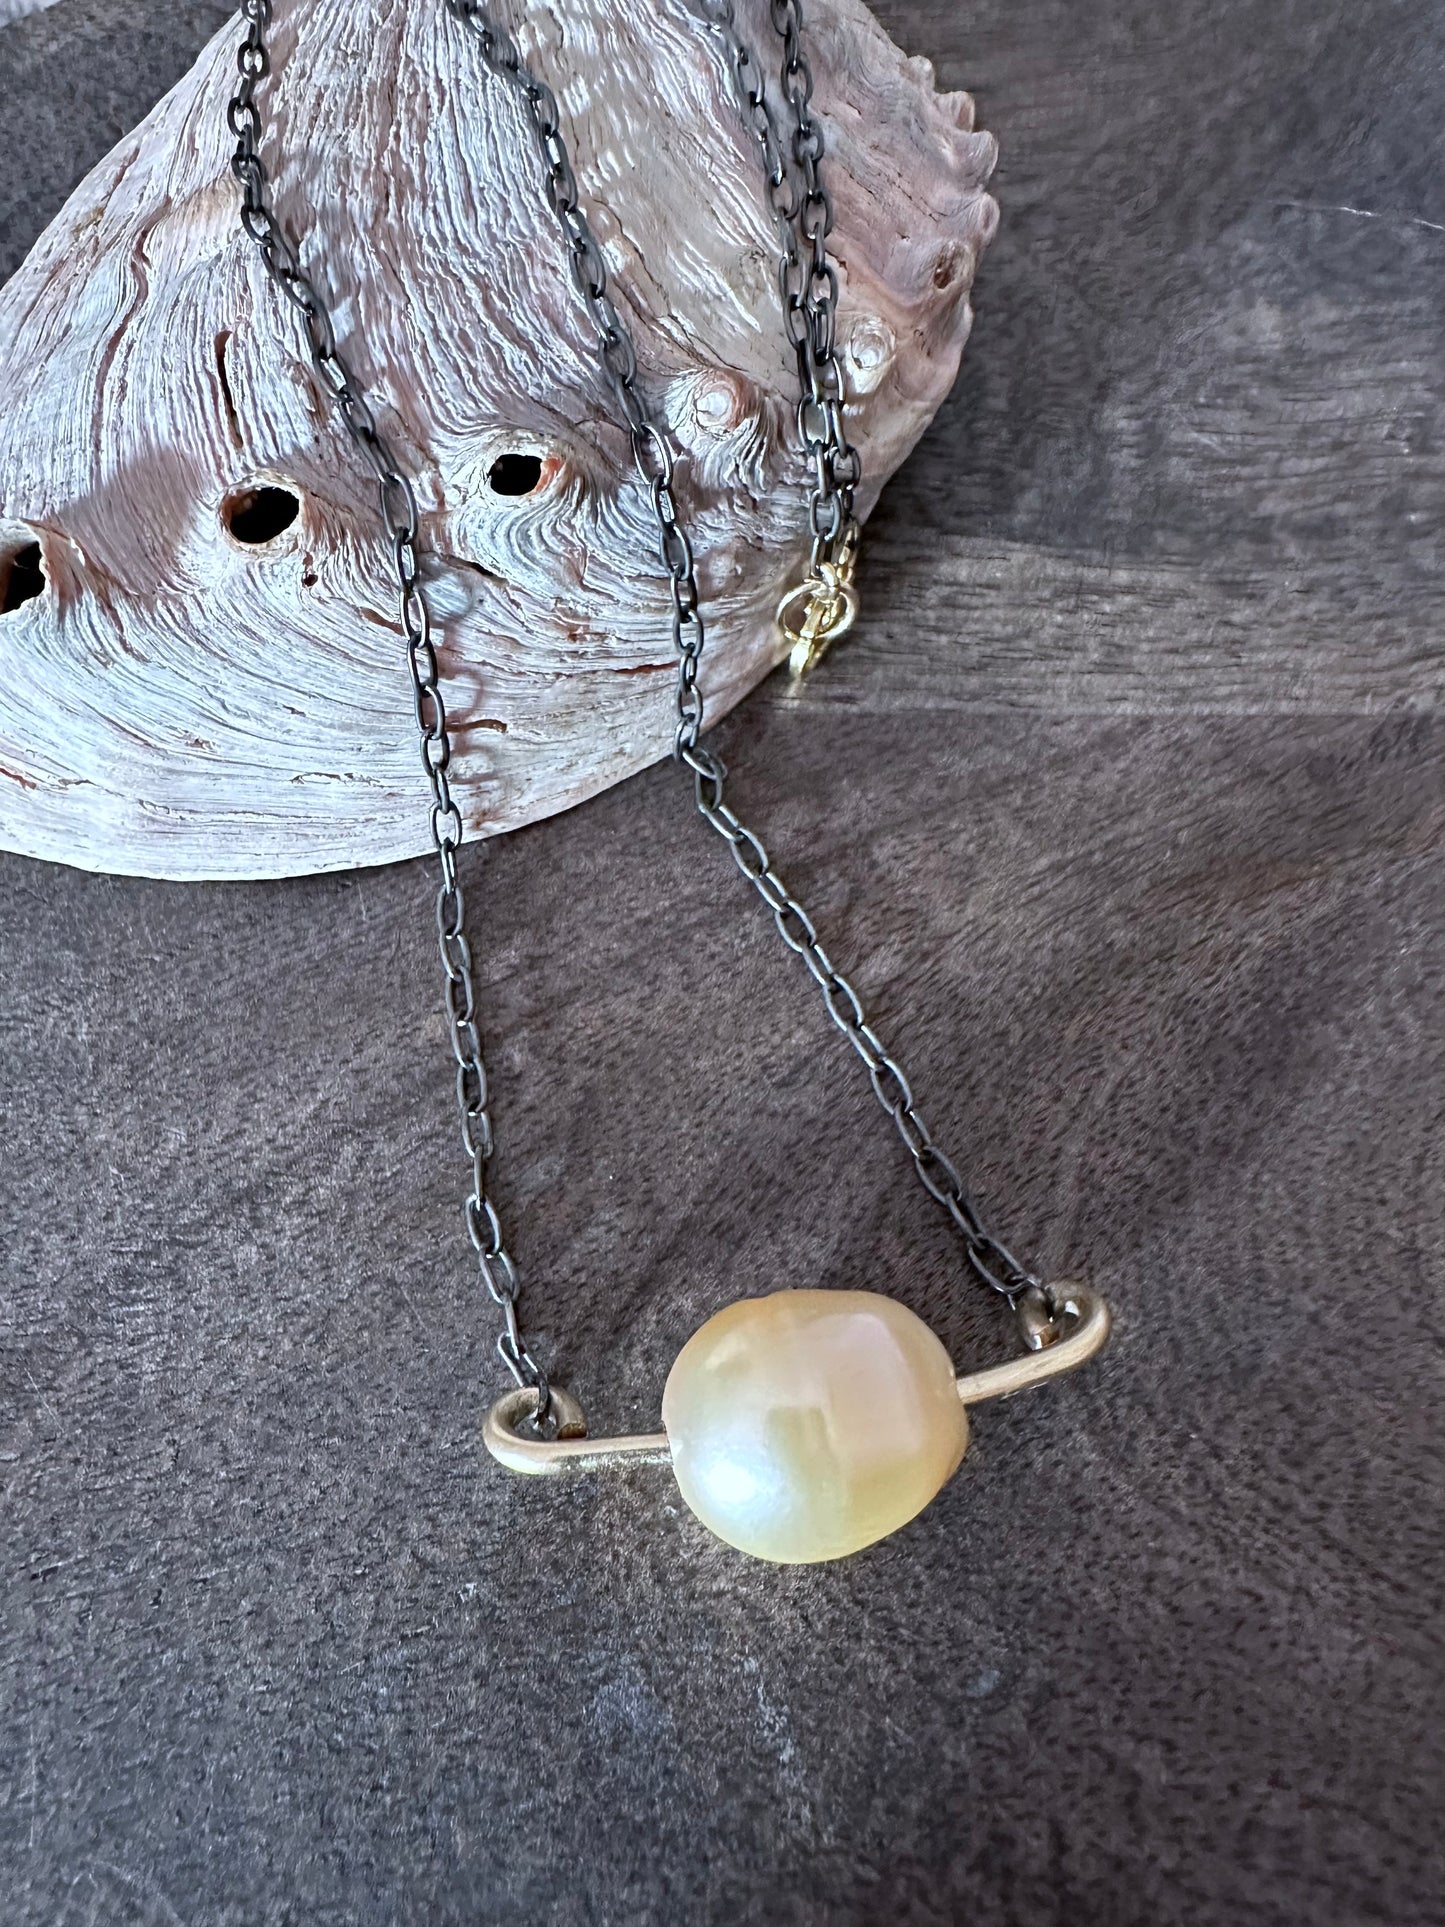 Orions Belt: Tahitian Or Baroque Fireball Pearl on a Gold Bar Necklace